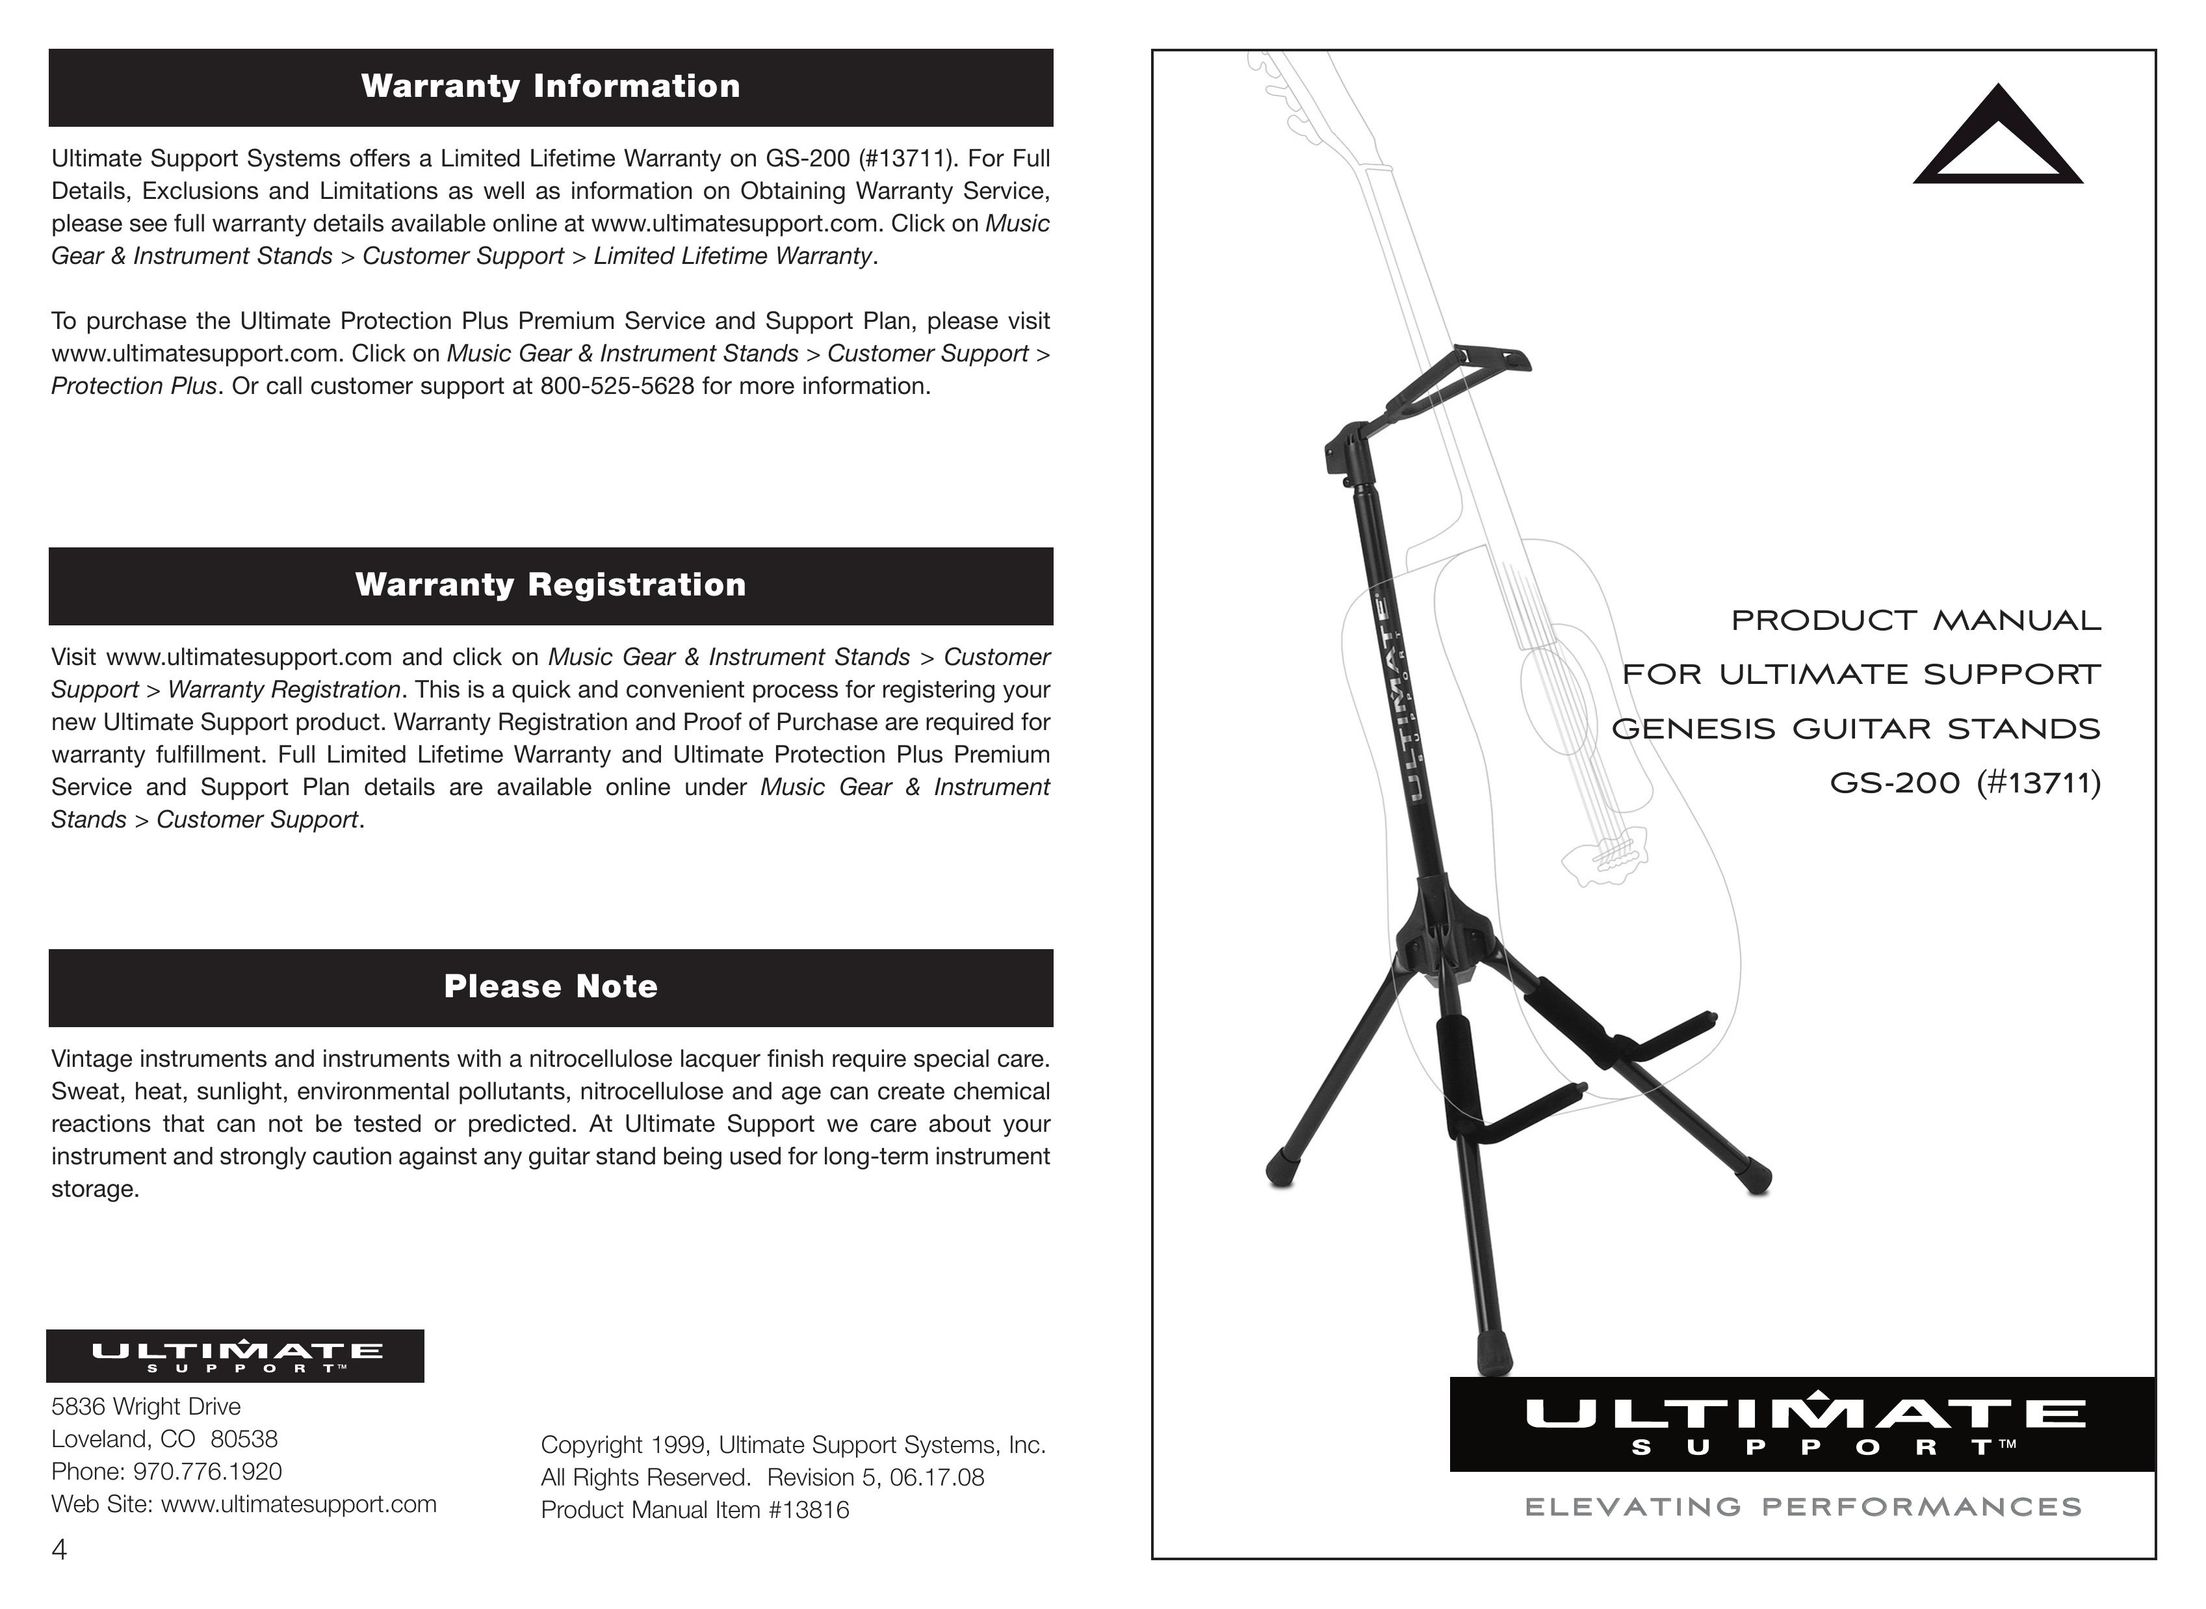 Ultimate Support Systems GS-200 Musical Toy Instrument User Manual